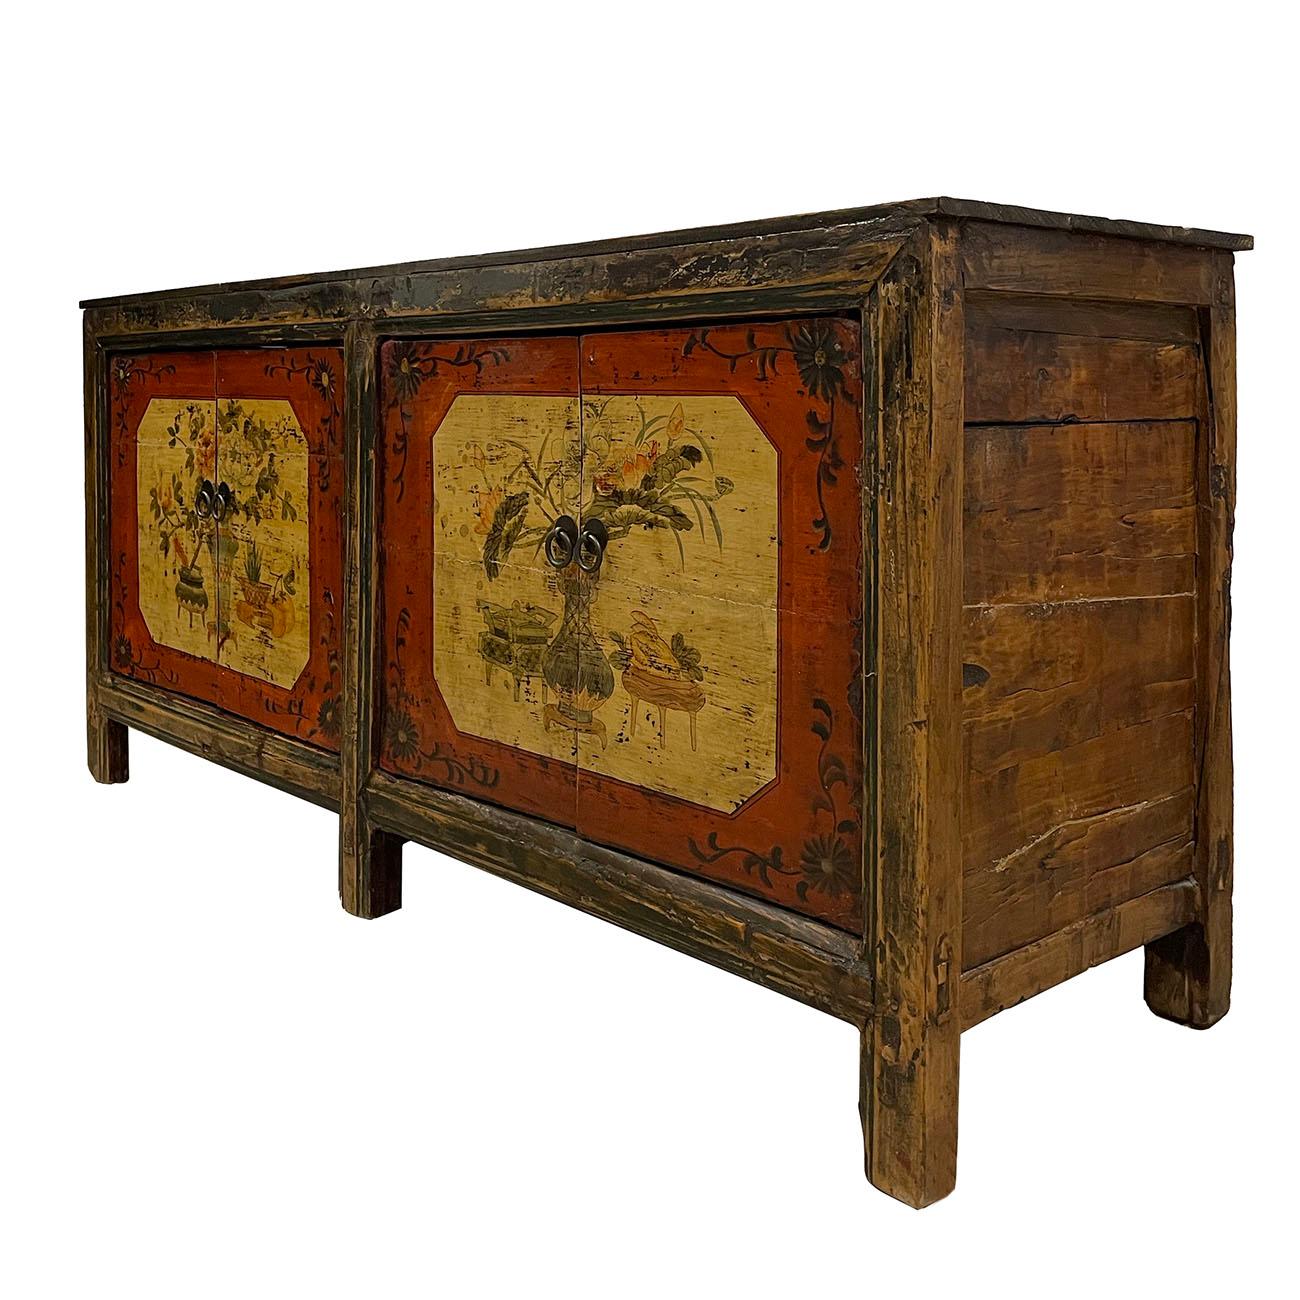 Size: 31in H x 65.5in W x 20in D
Door opening: 20in H x 24in W  each
Origin: Mongolia, China
Circa: 1850 - 1900
Material: Wood
Condition: Original finished, solid wood construction, hand painted, antique hardware, heavy, sturdy, normal age